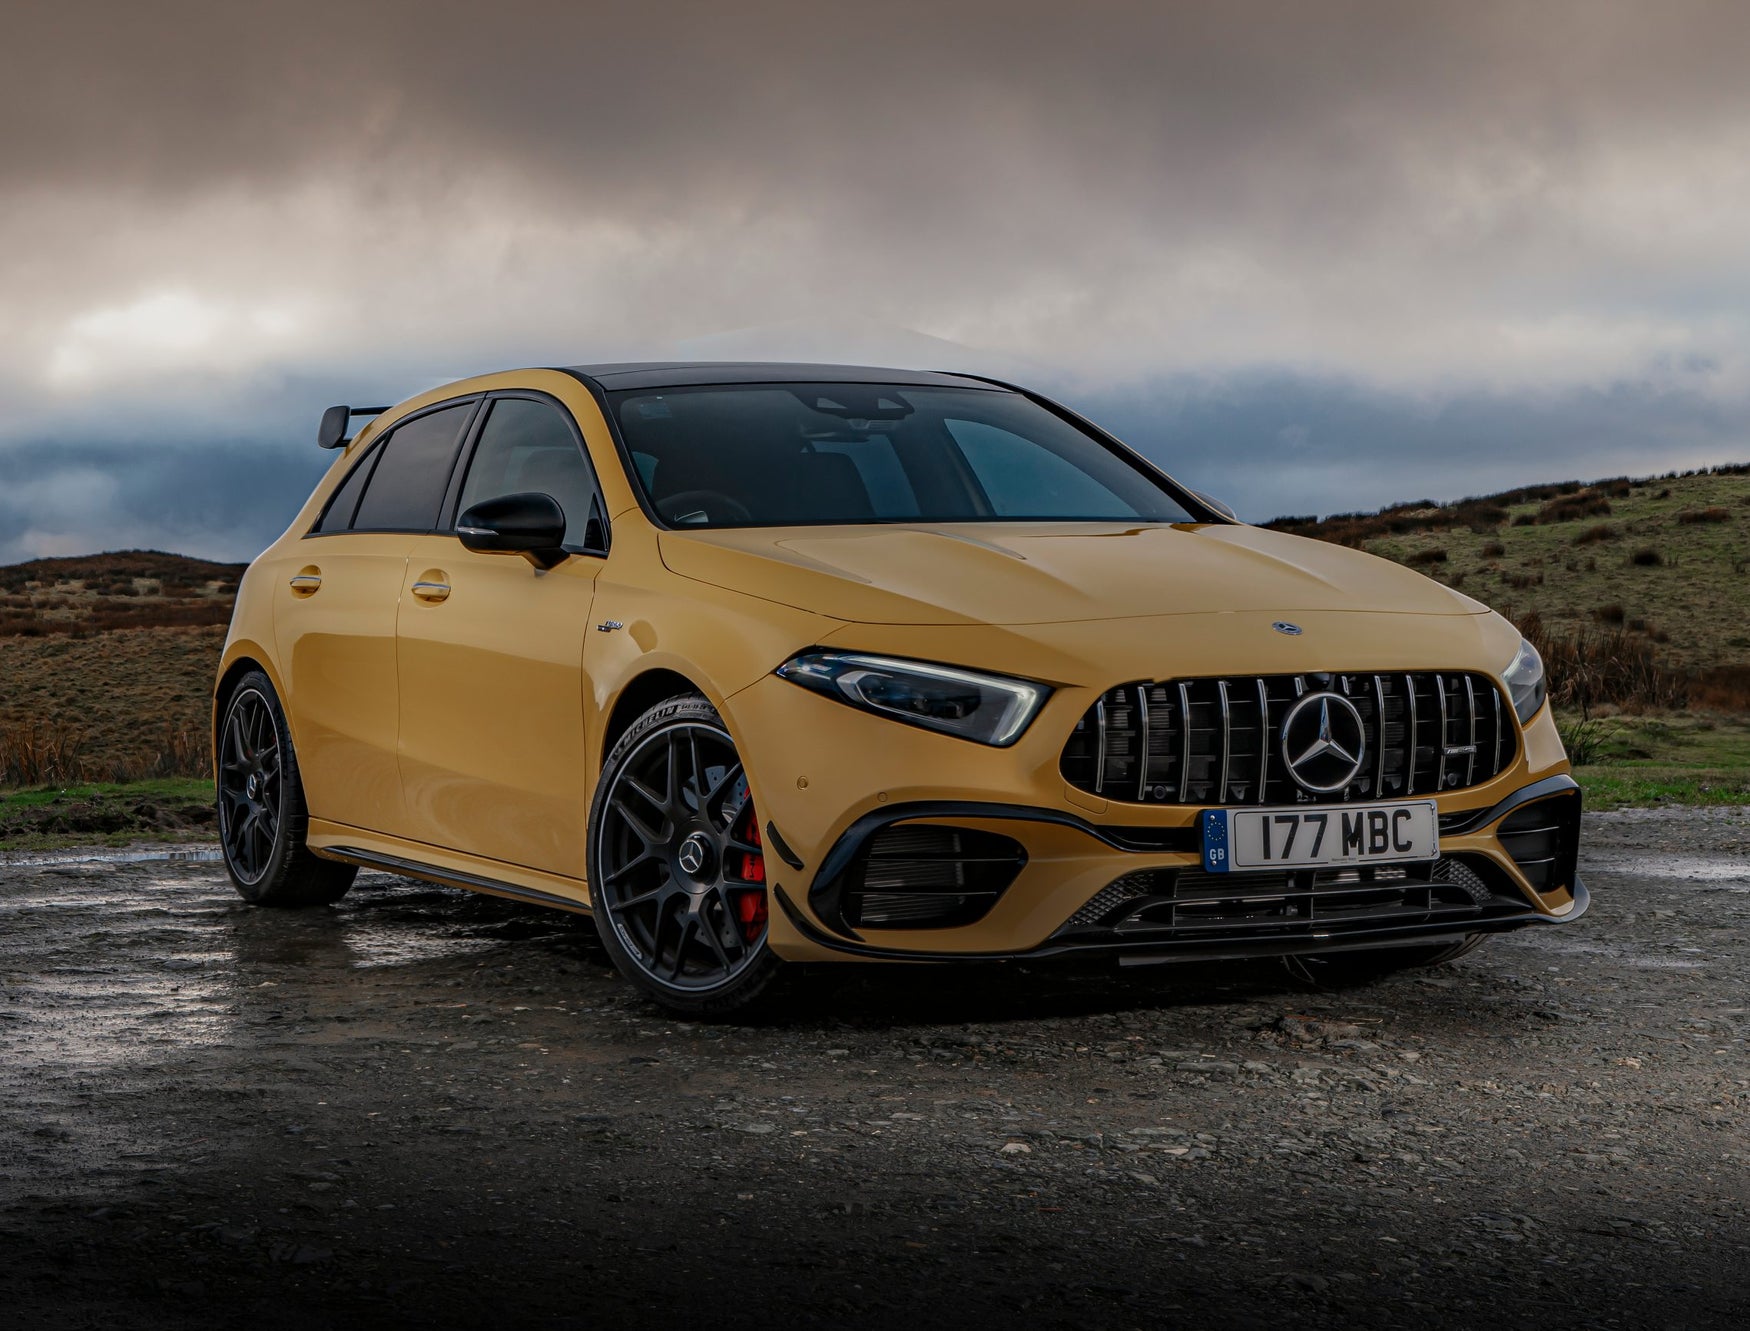 2021 Mercedes-AMG A 45 S 4MATIC+ Plus first drive front-three quarter